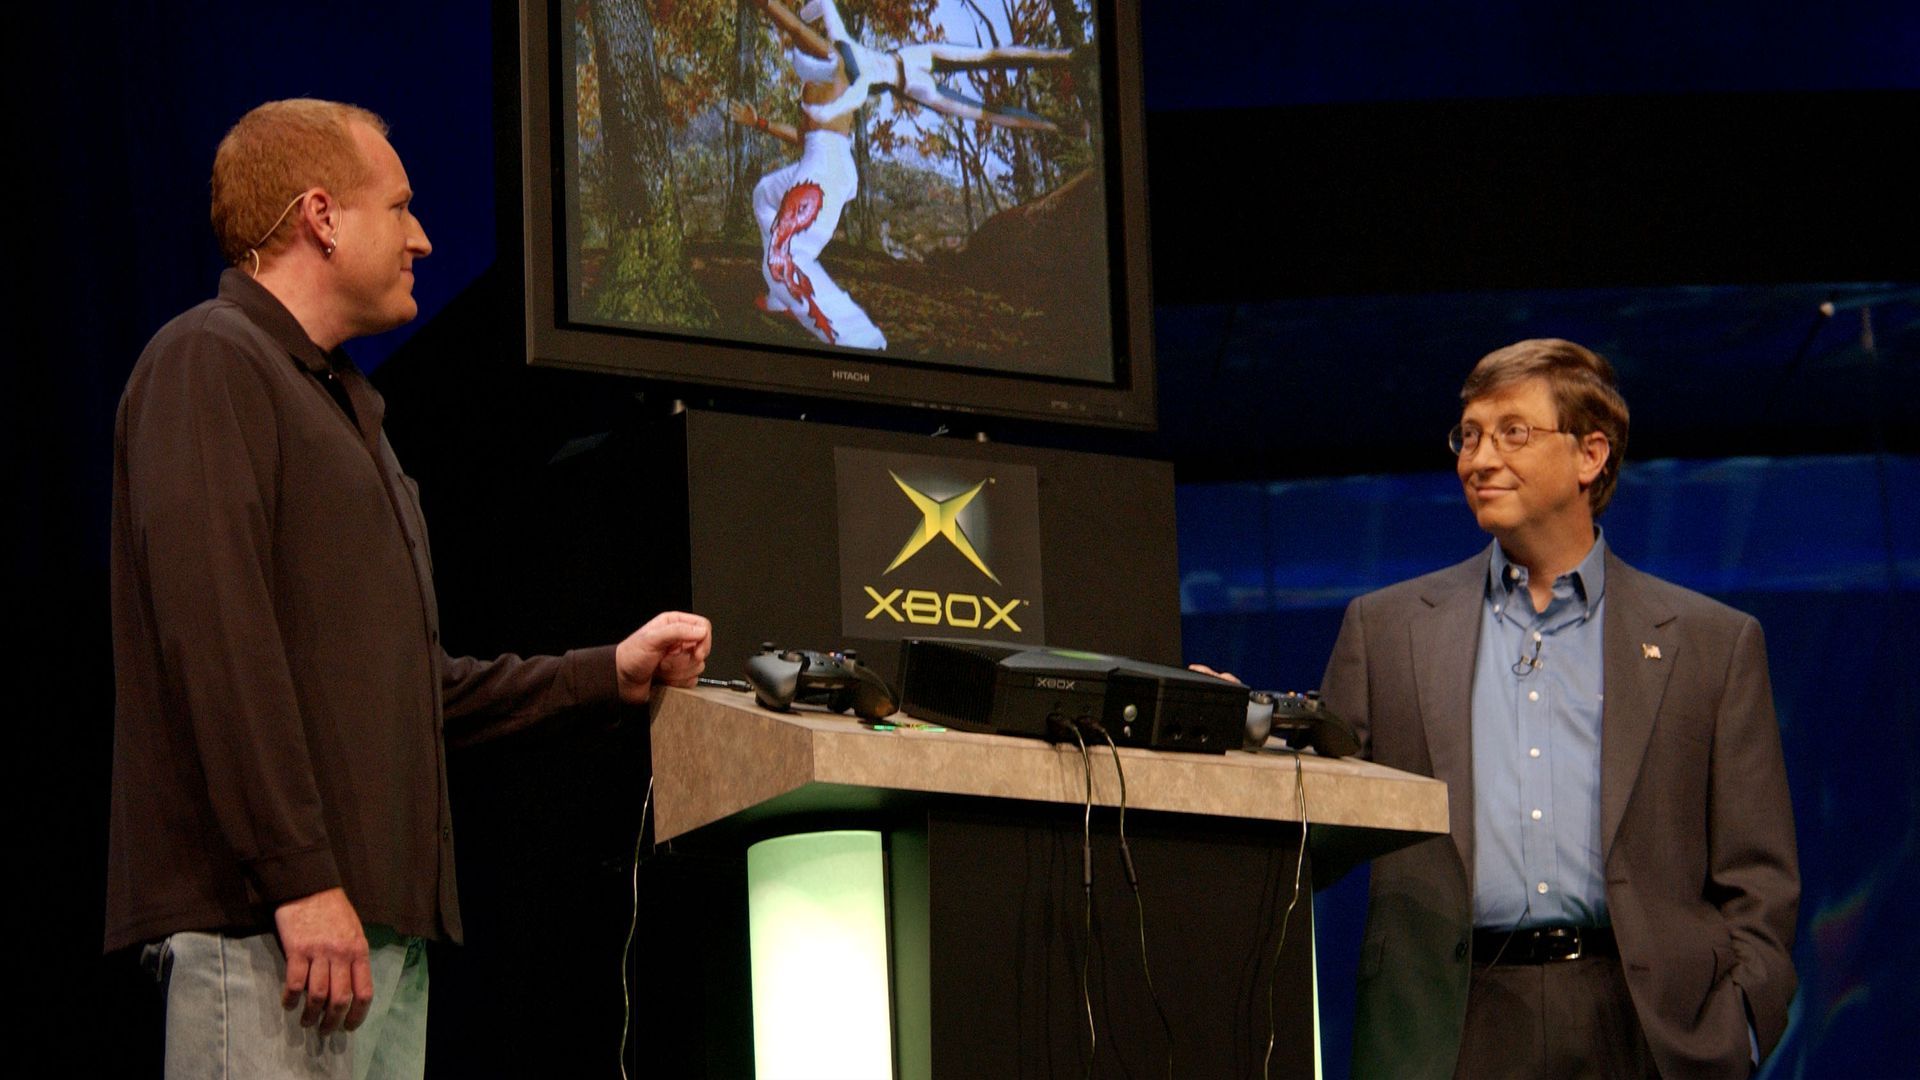 Photo of Seamus Blackley and Bill Gates standing on stage with an Xbox console in between them